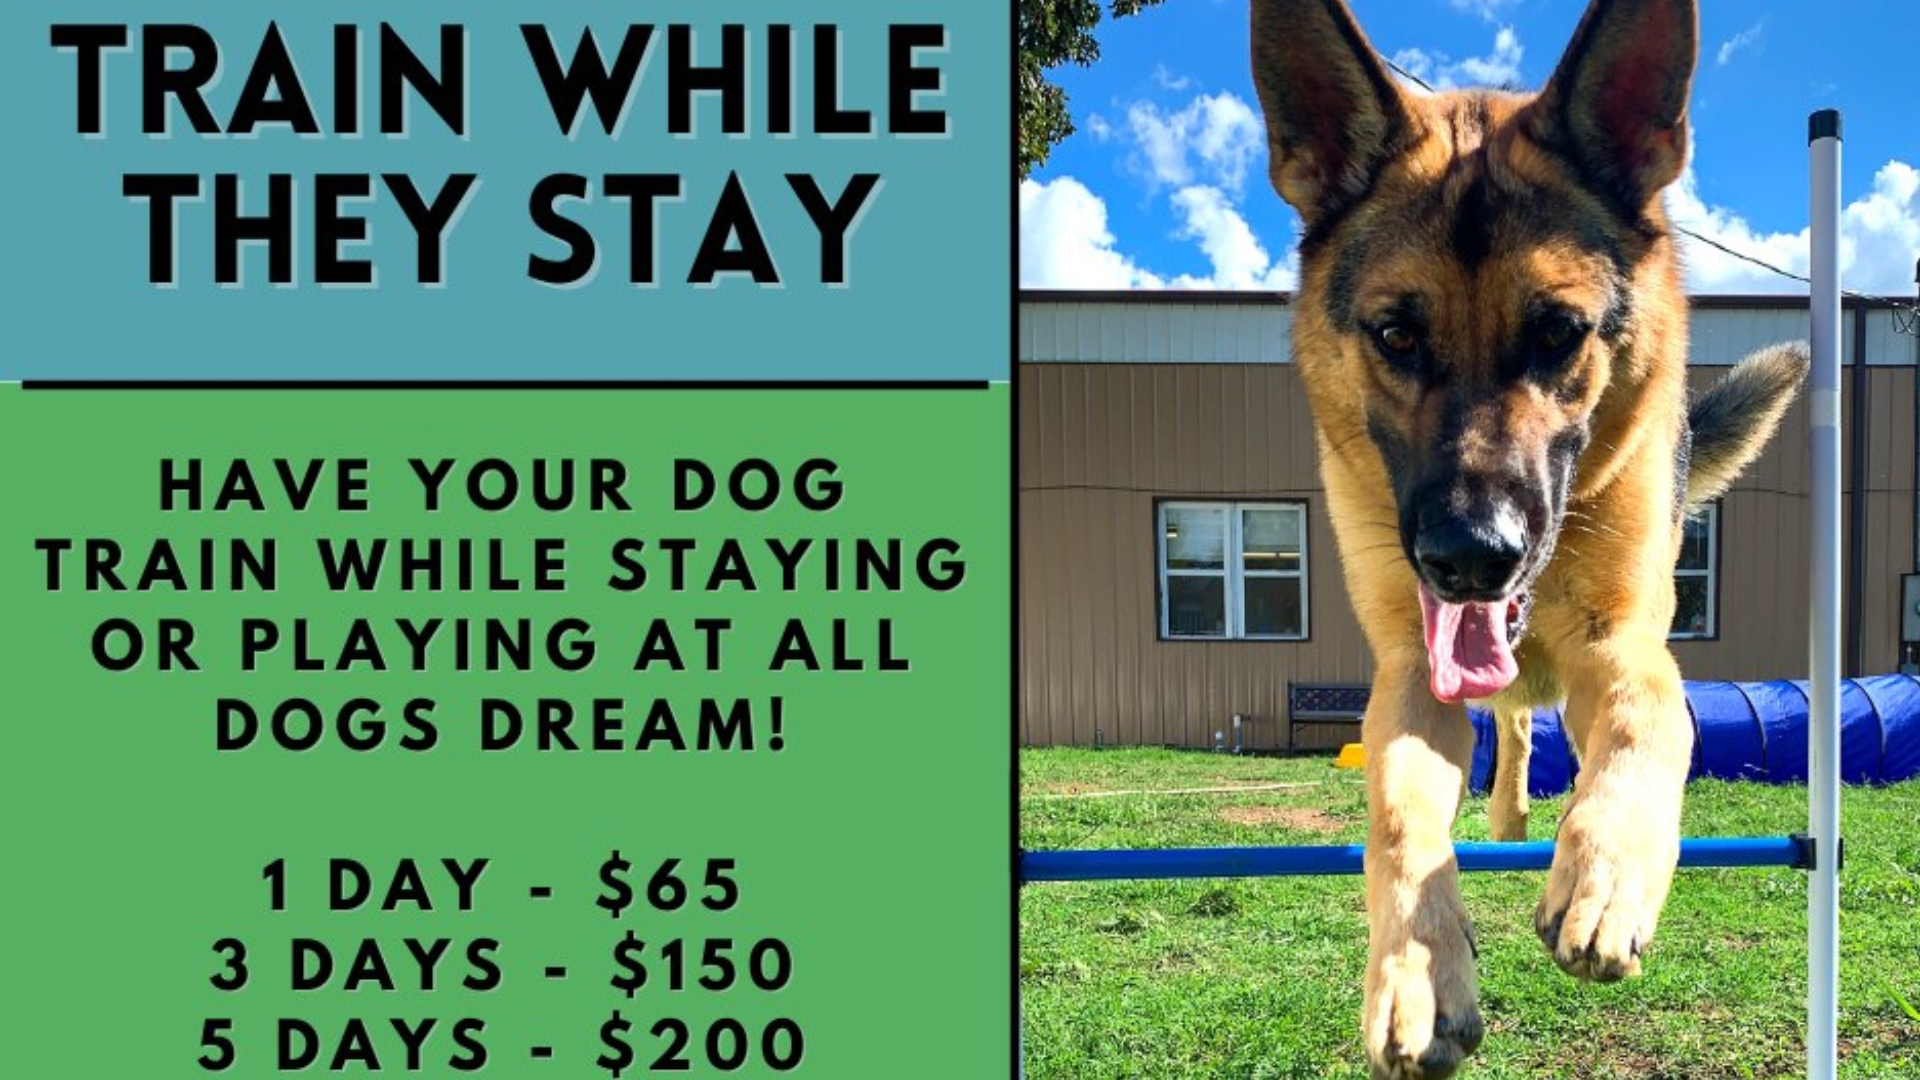 Bring Your Dog for a Stay & Training This Holiday Season